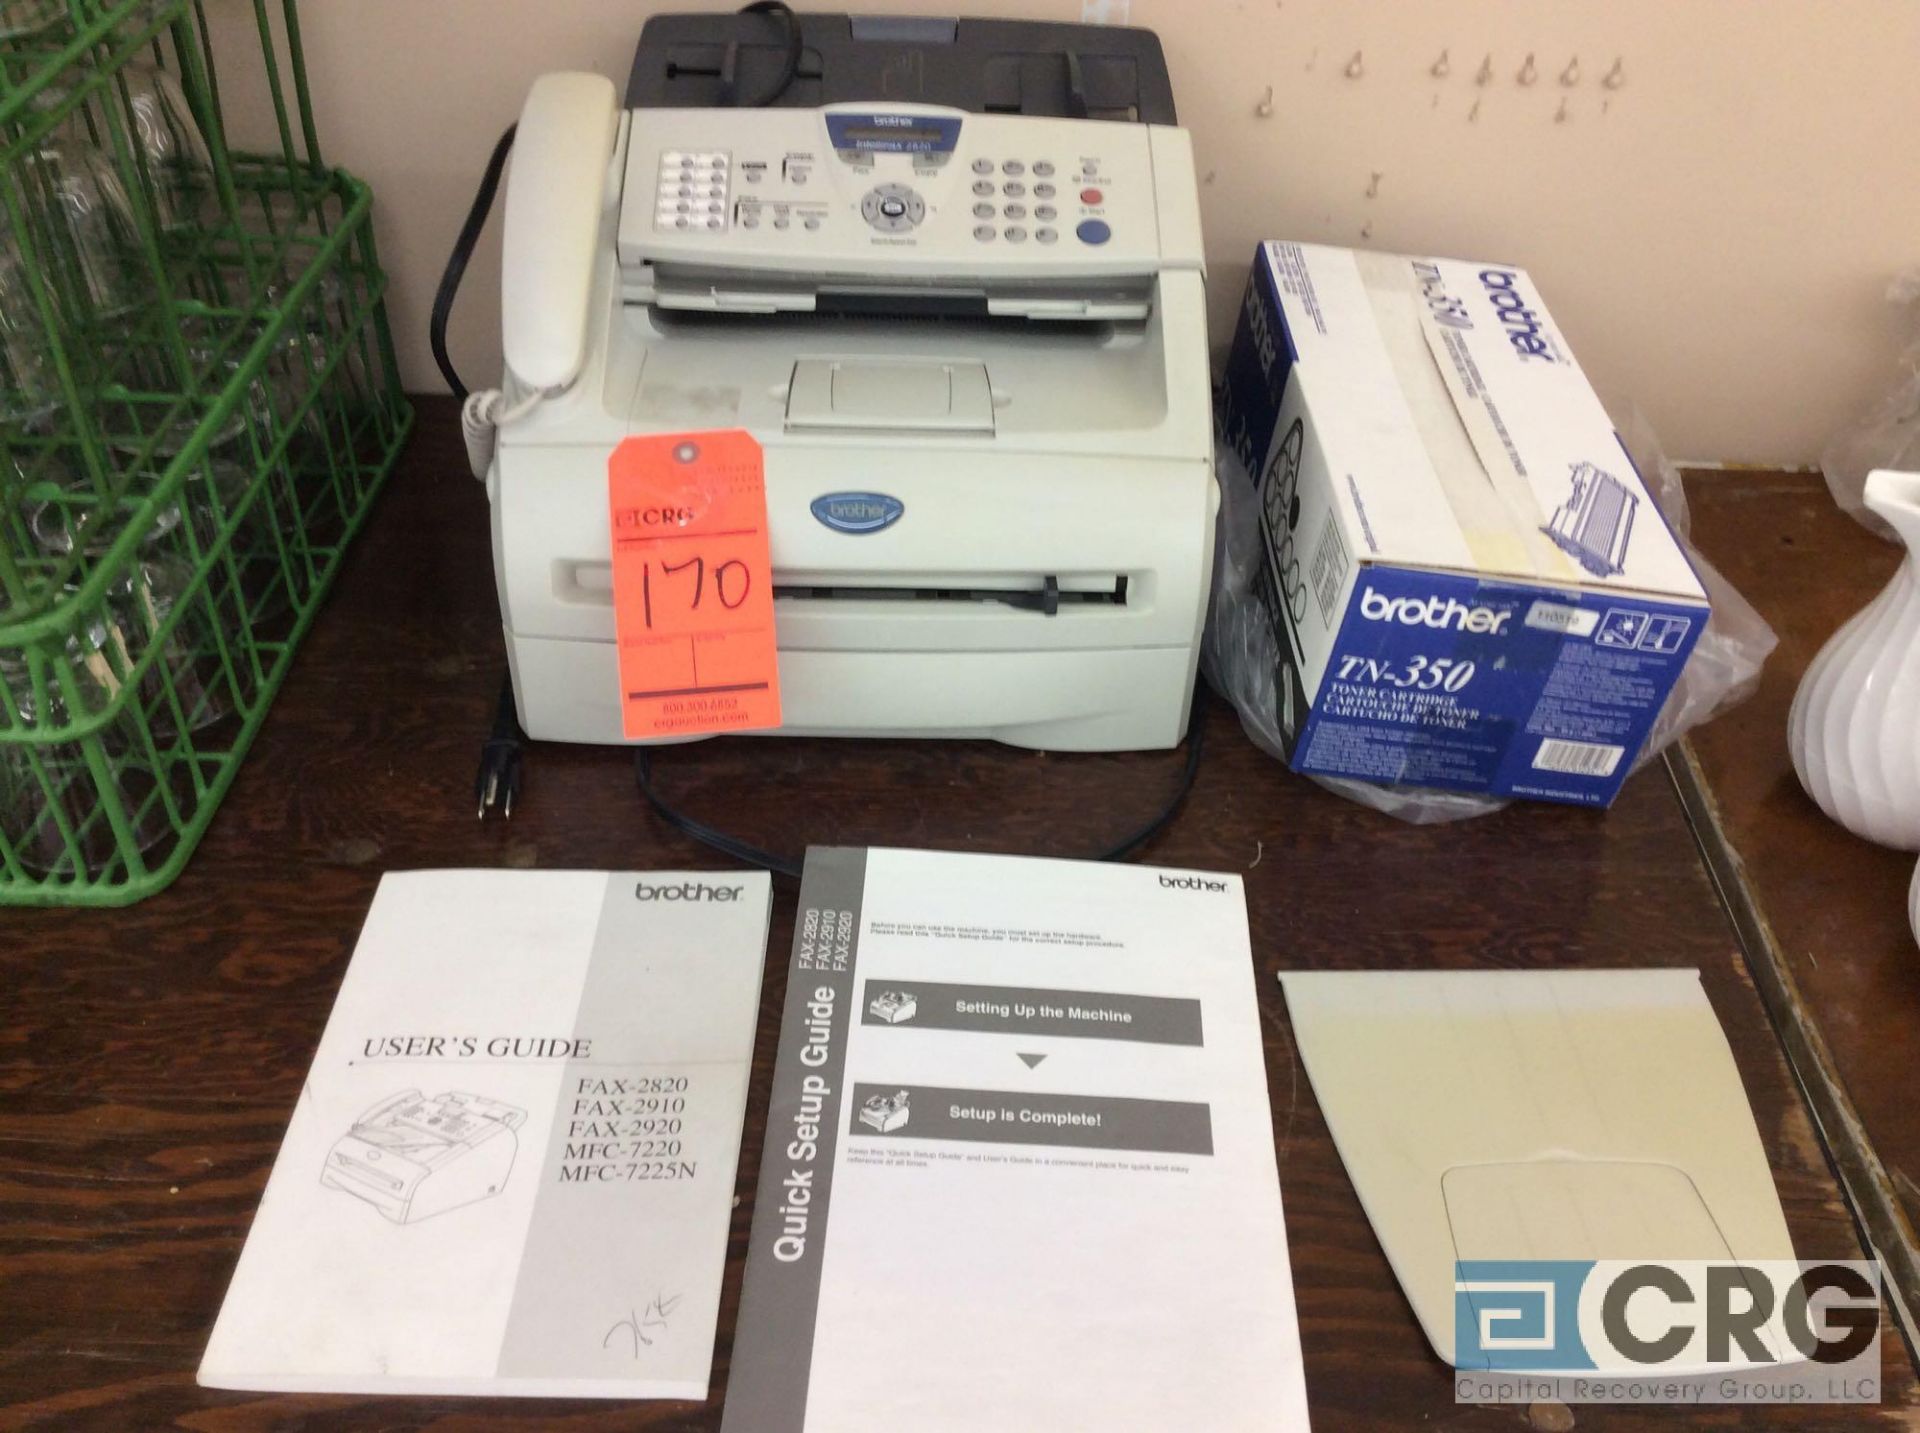 Brother Intellifax 2820 copier, fax machine, with manuals and replacement toner cartridge.